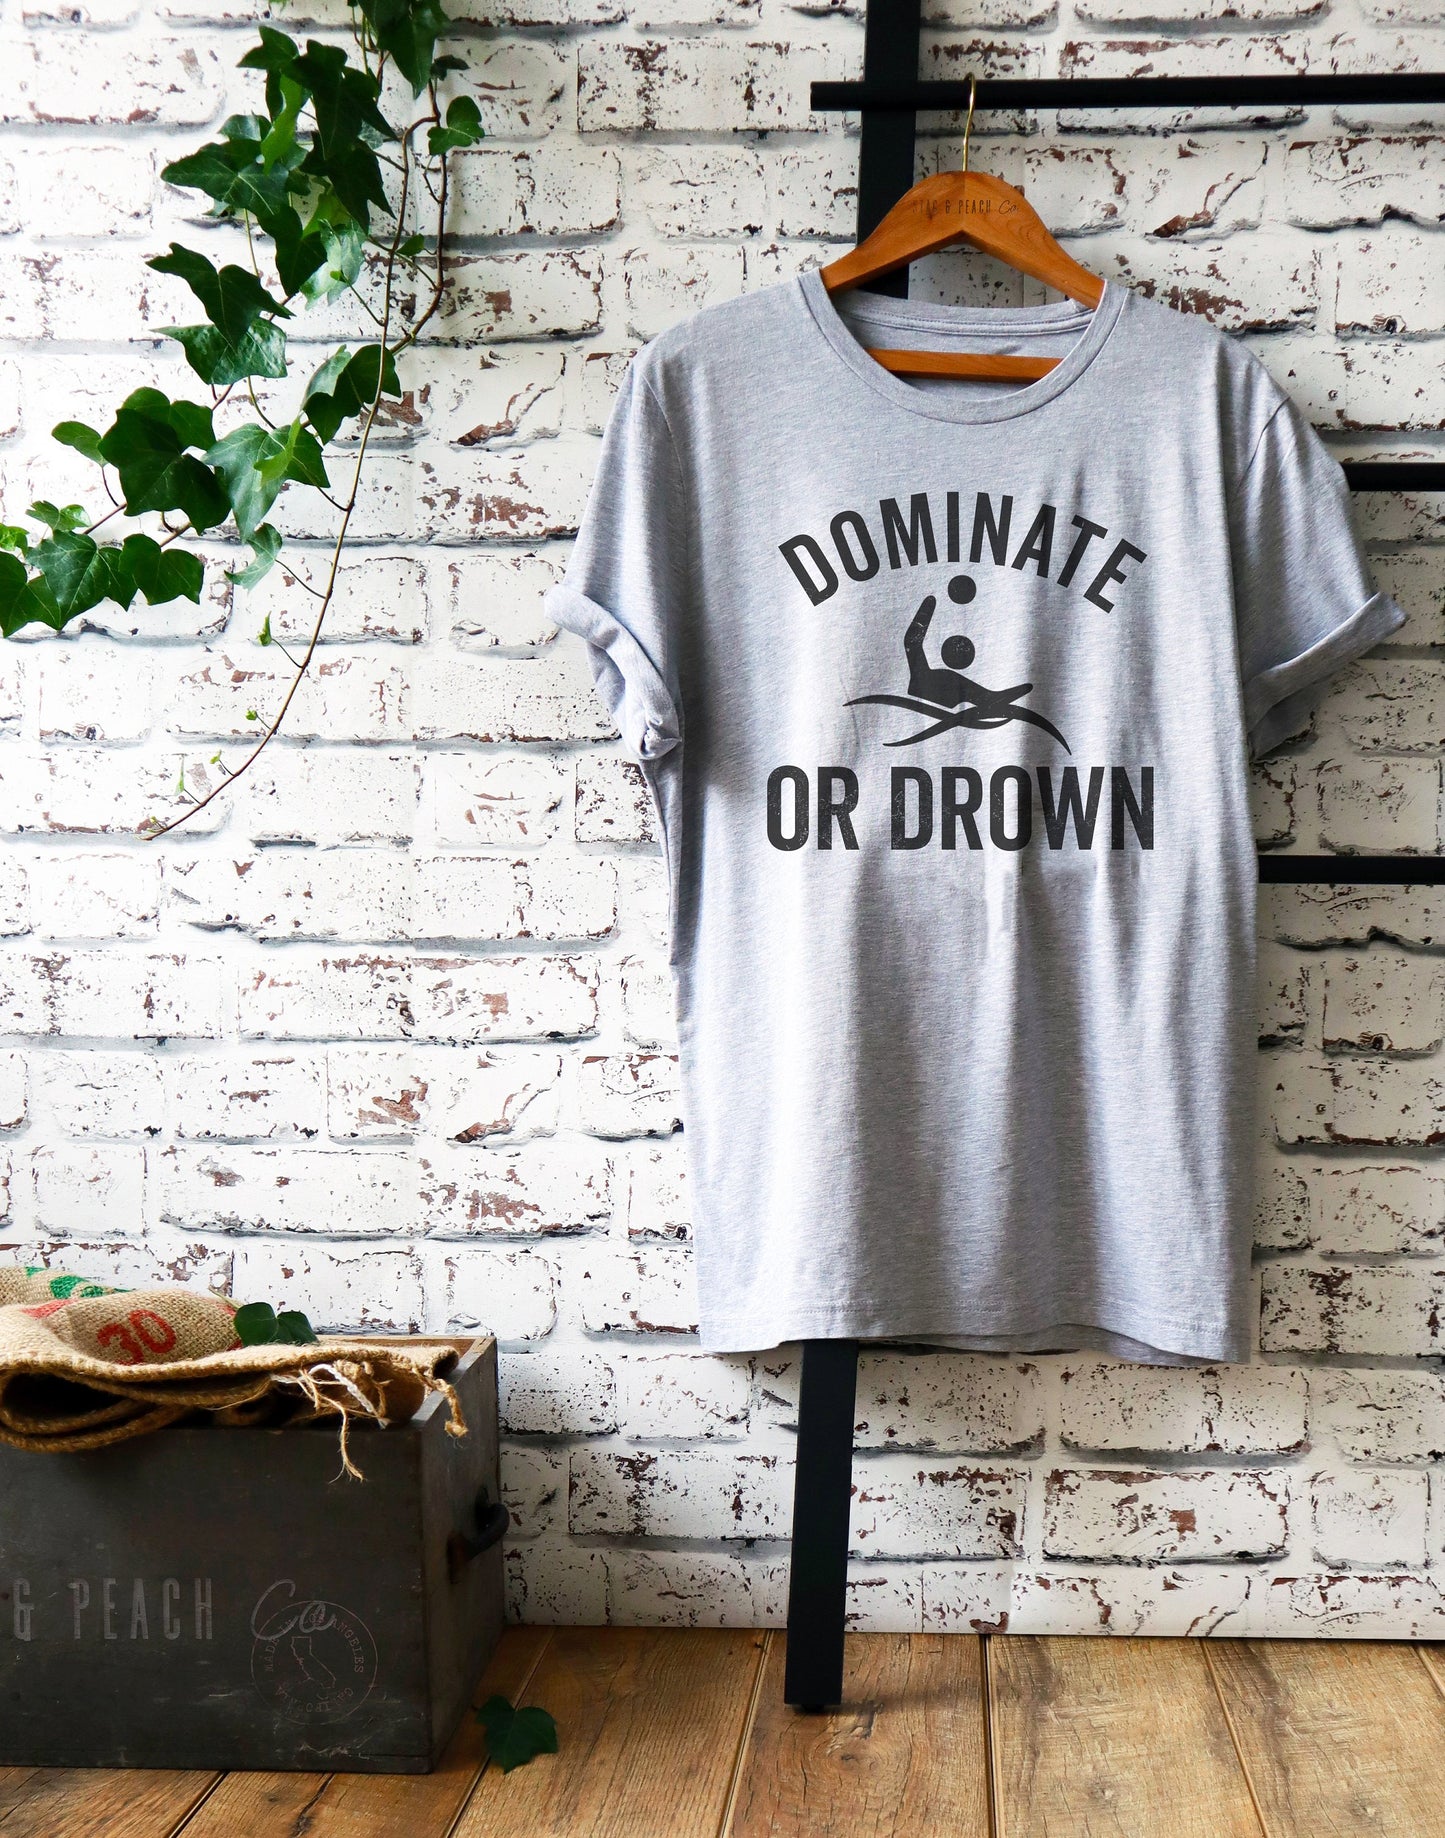 Dominate Or Drown Unisex Shirt - Water Polo Shirt, Water Polo Gift, Polo Shirt, Polo Gift, Water Polo Player